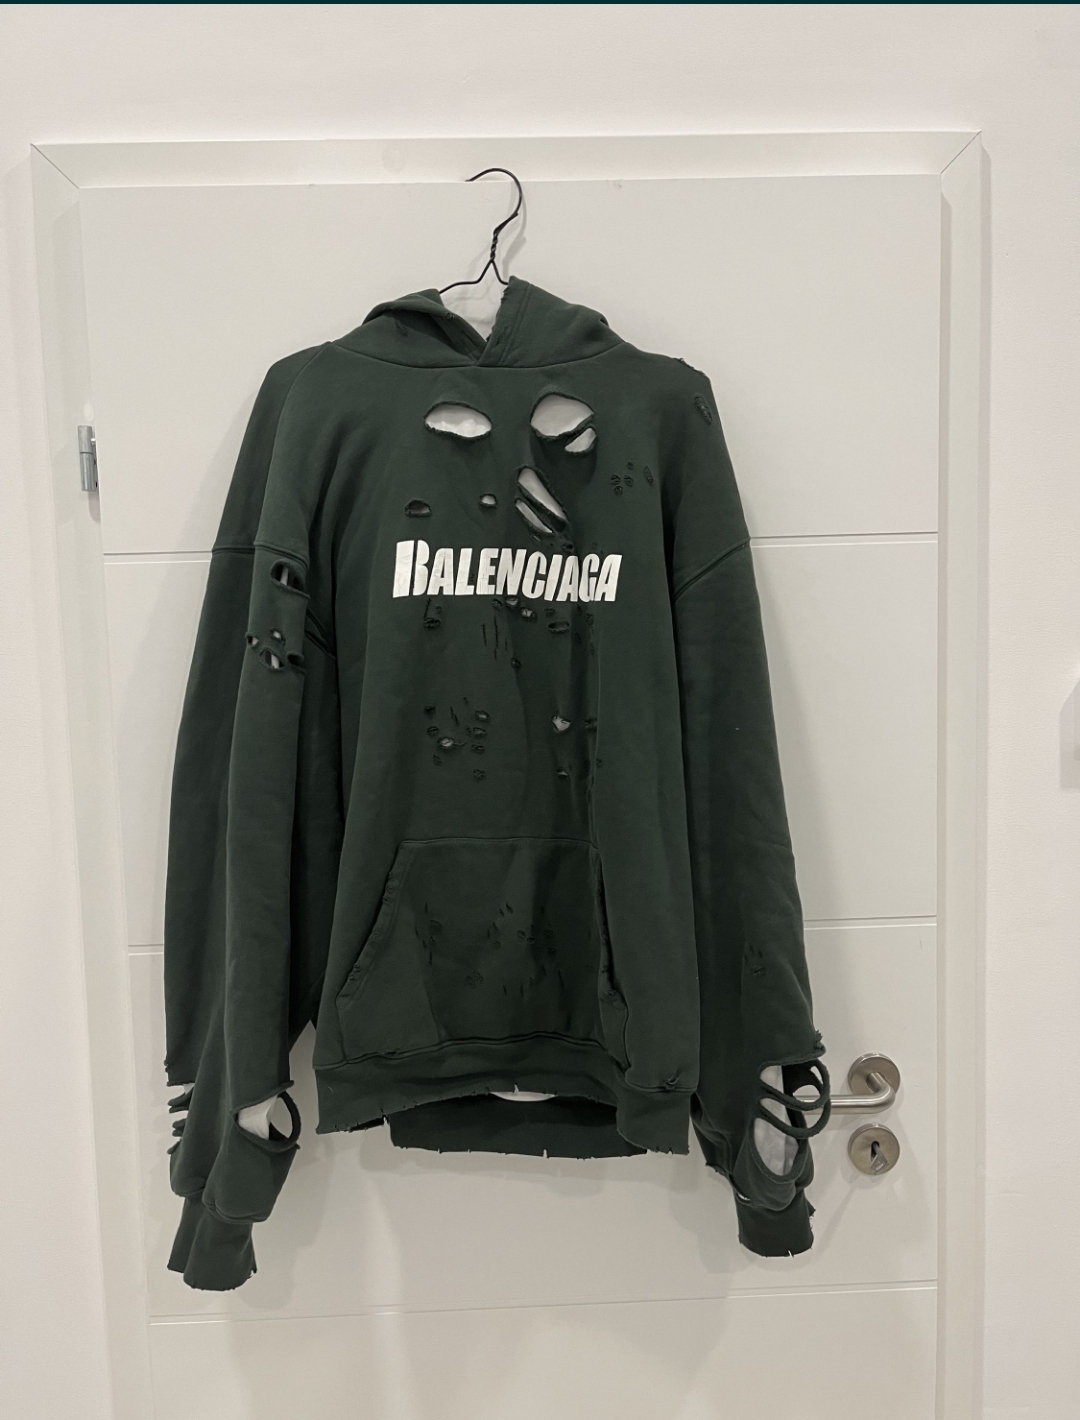 Balenciaga Destroyed Hoodie ripped distressed logo spellout